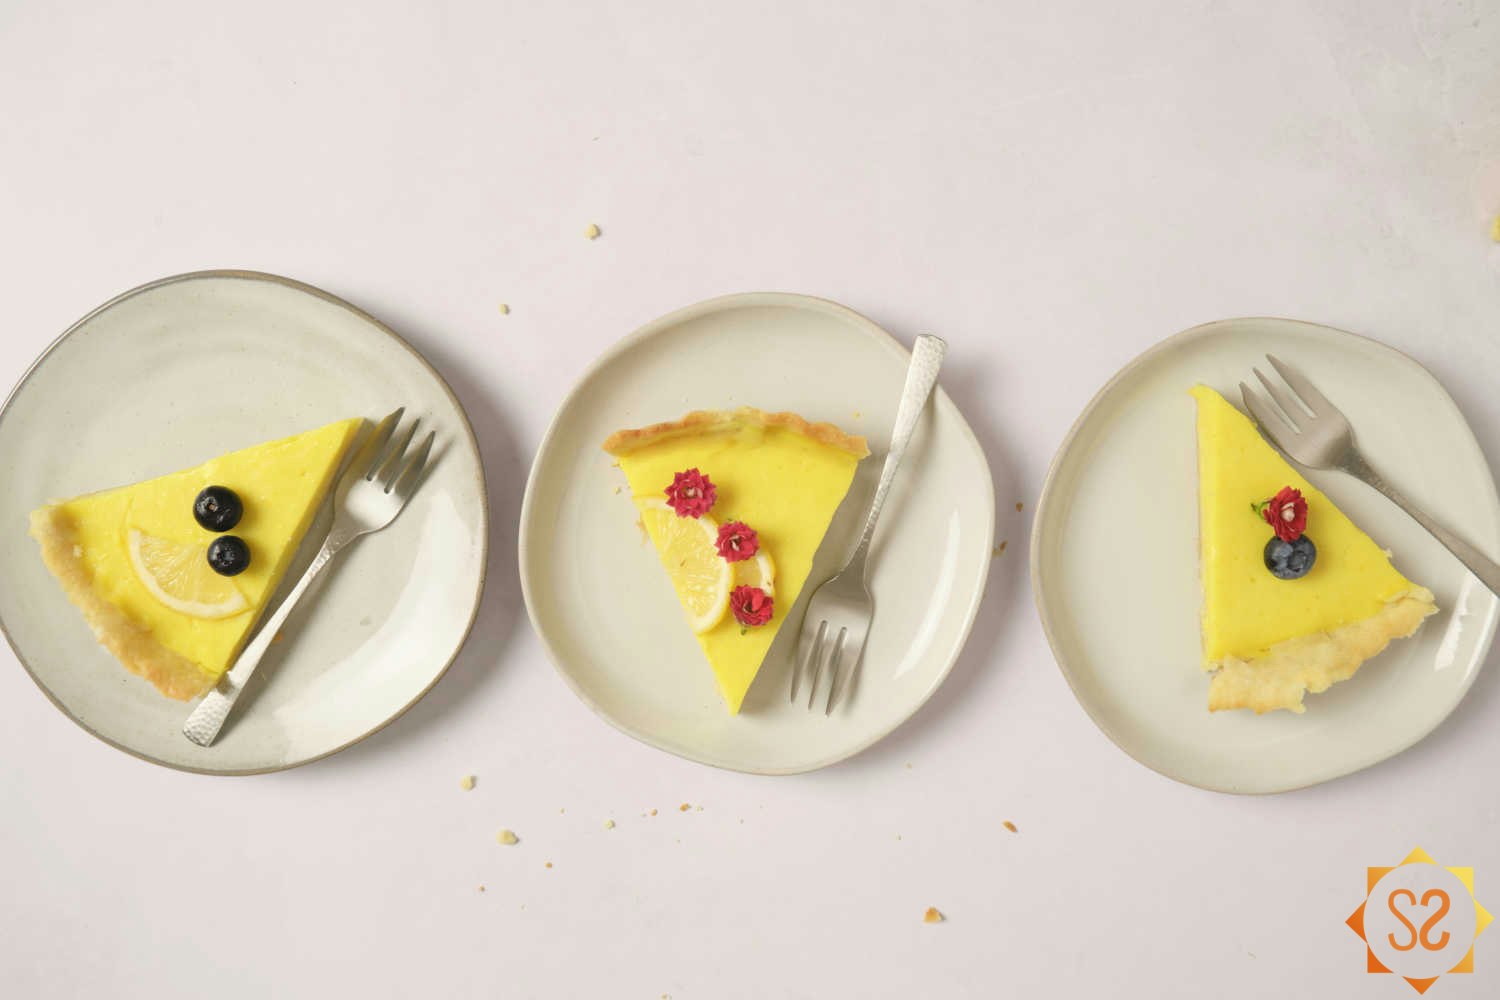 Three slices of vegan lemon tart on three plates with forks lined up from right to left.